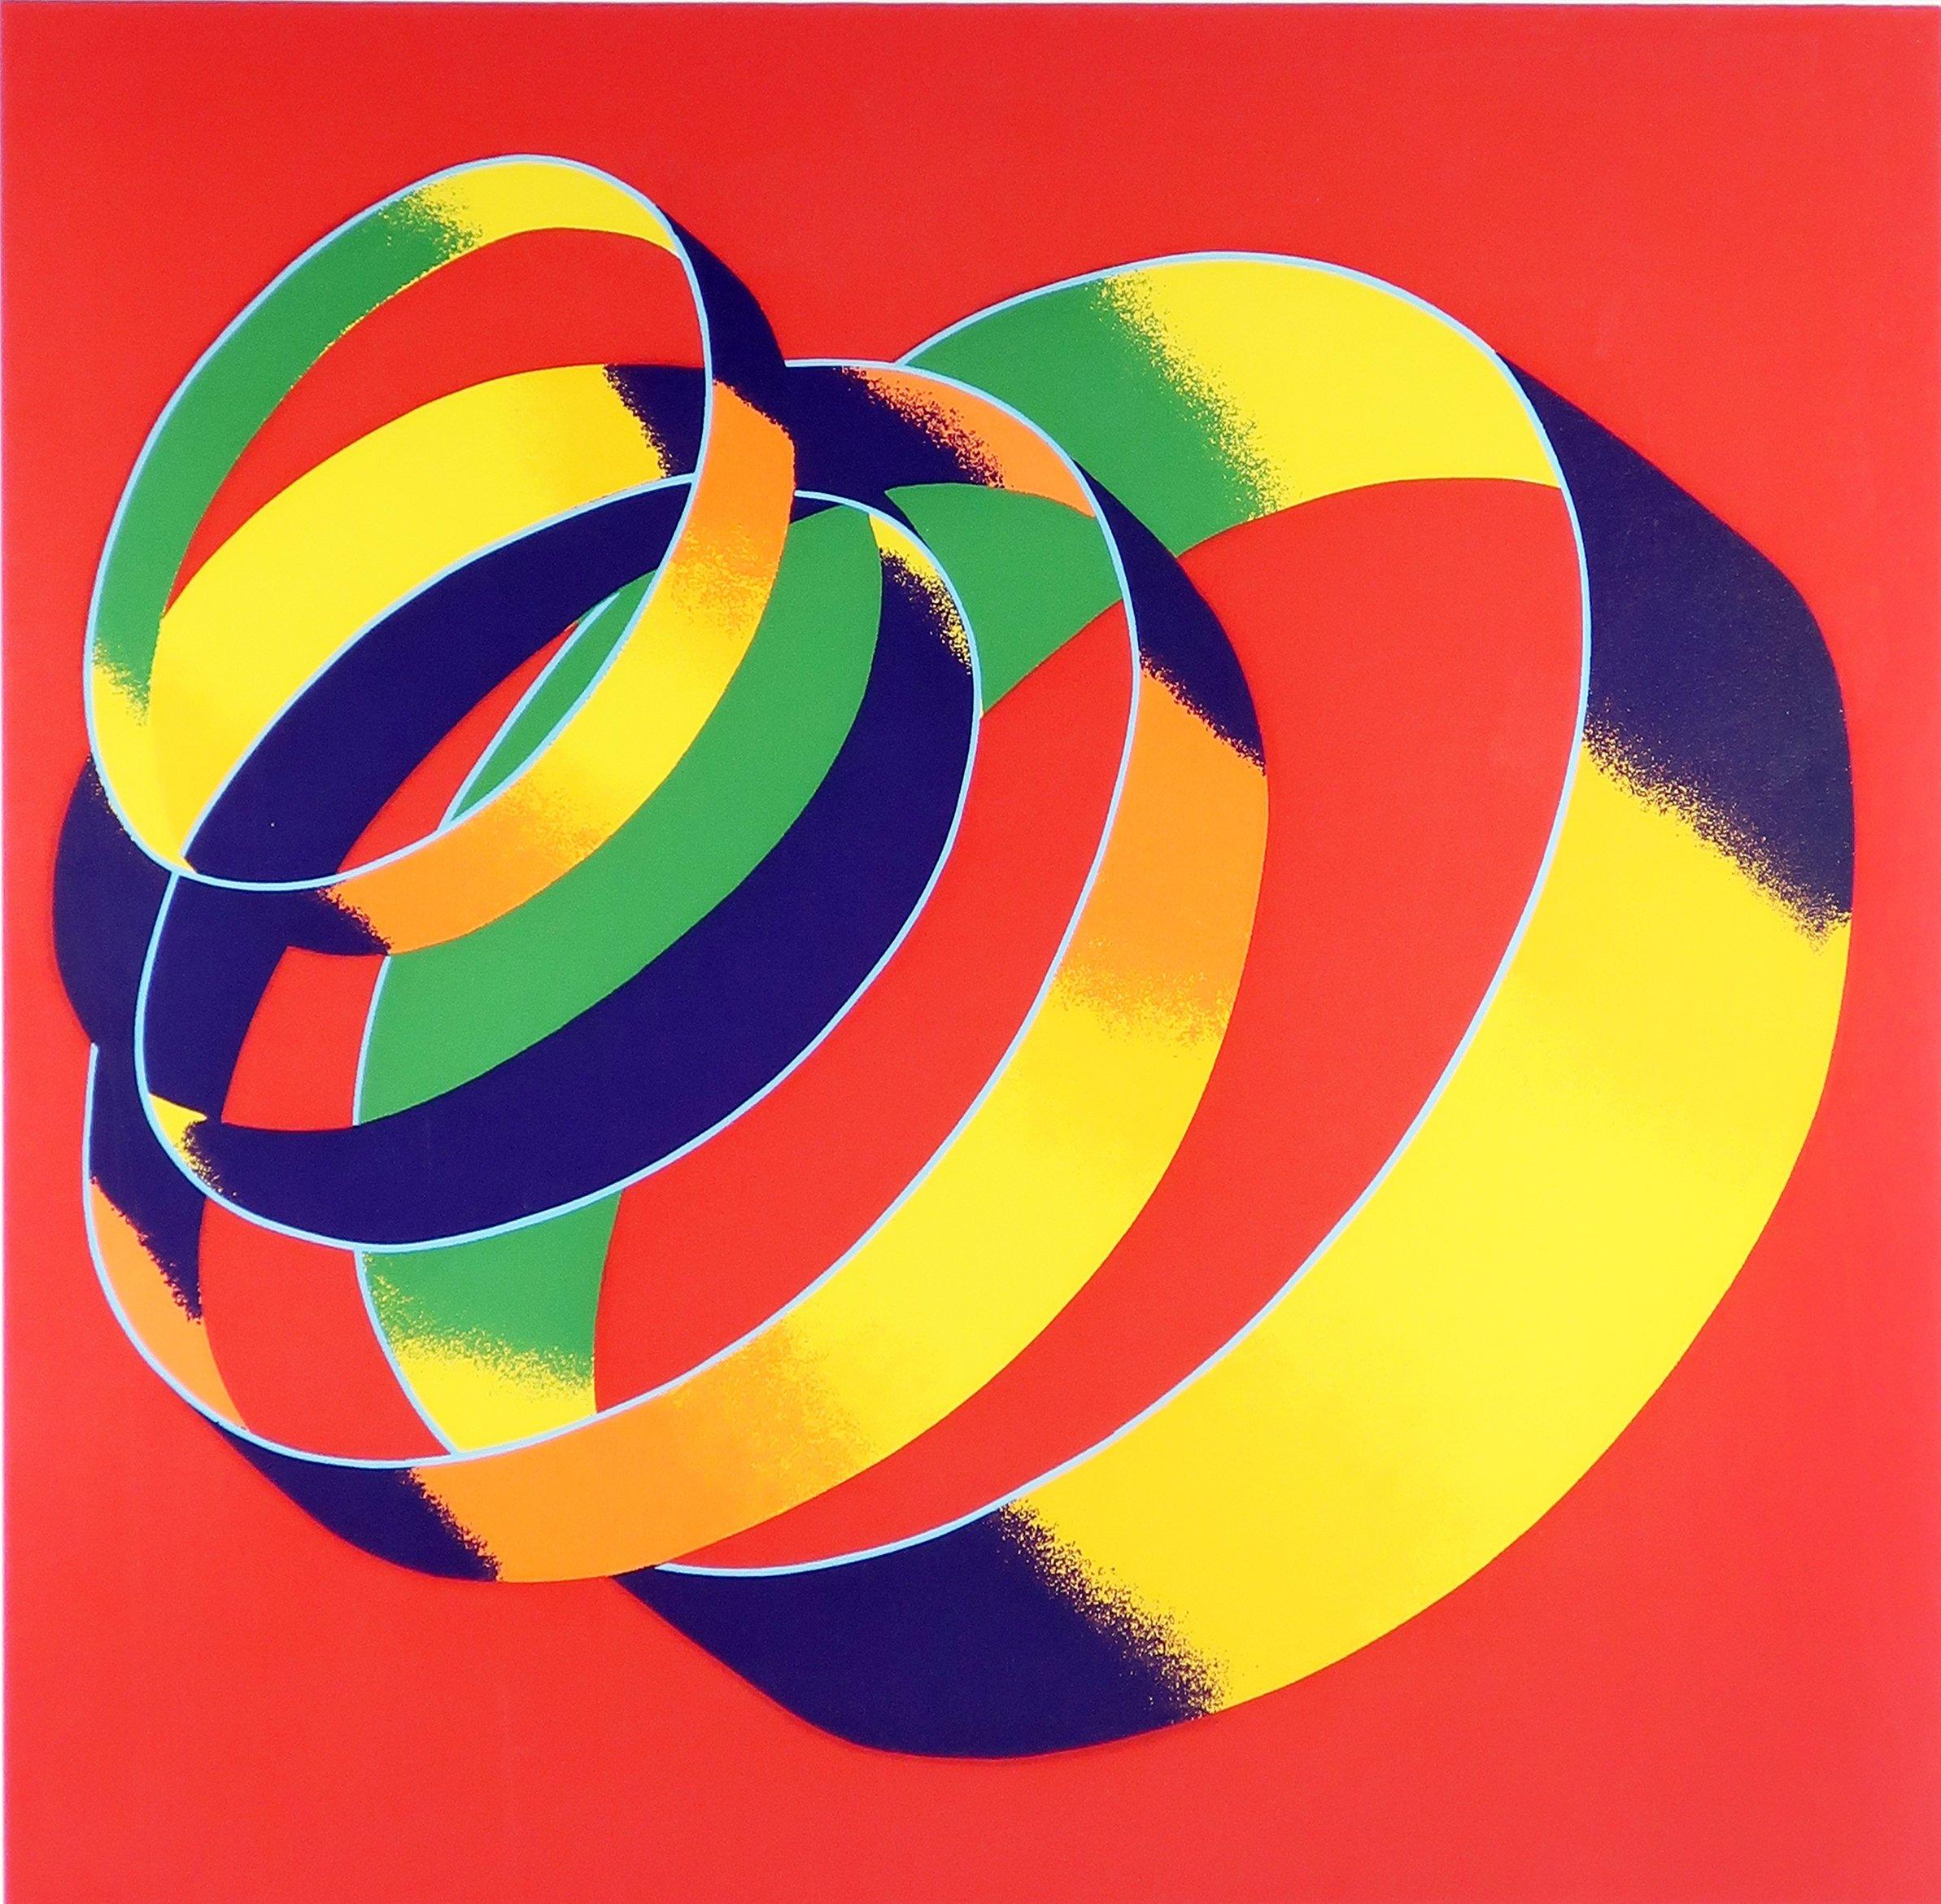 An original 1978 serigraph by American artist Jack Brusca. Born in New York in 1939, Brusca studied at the University of New Hampshire and the School of Visual Arts in New York City. Lauded by one critic as being 